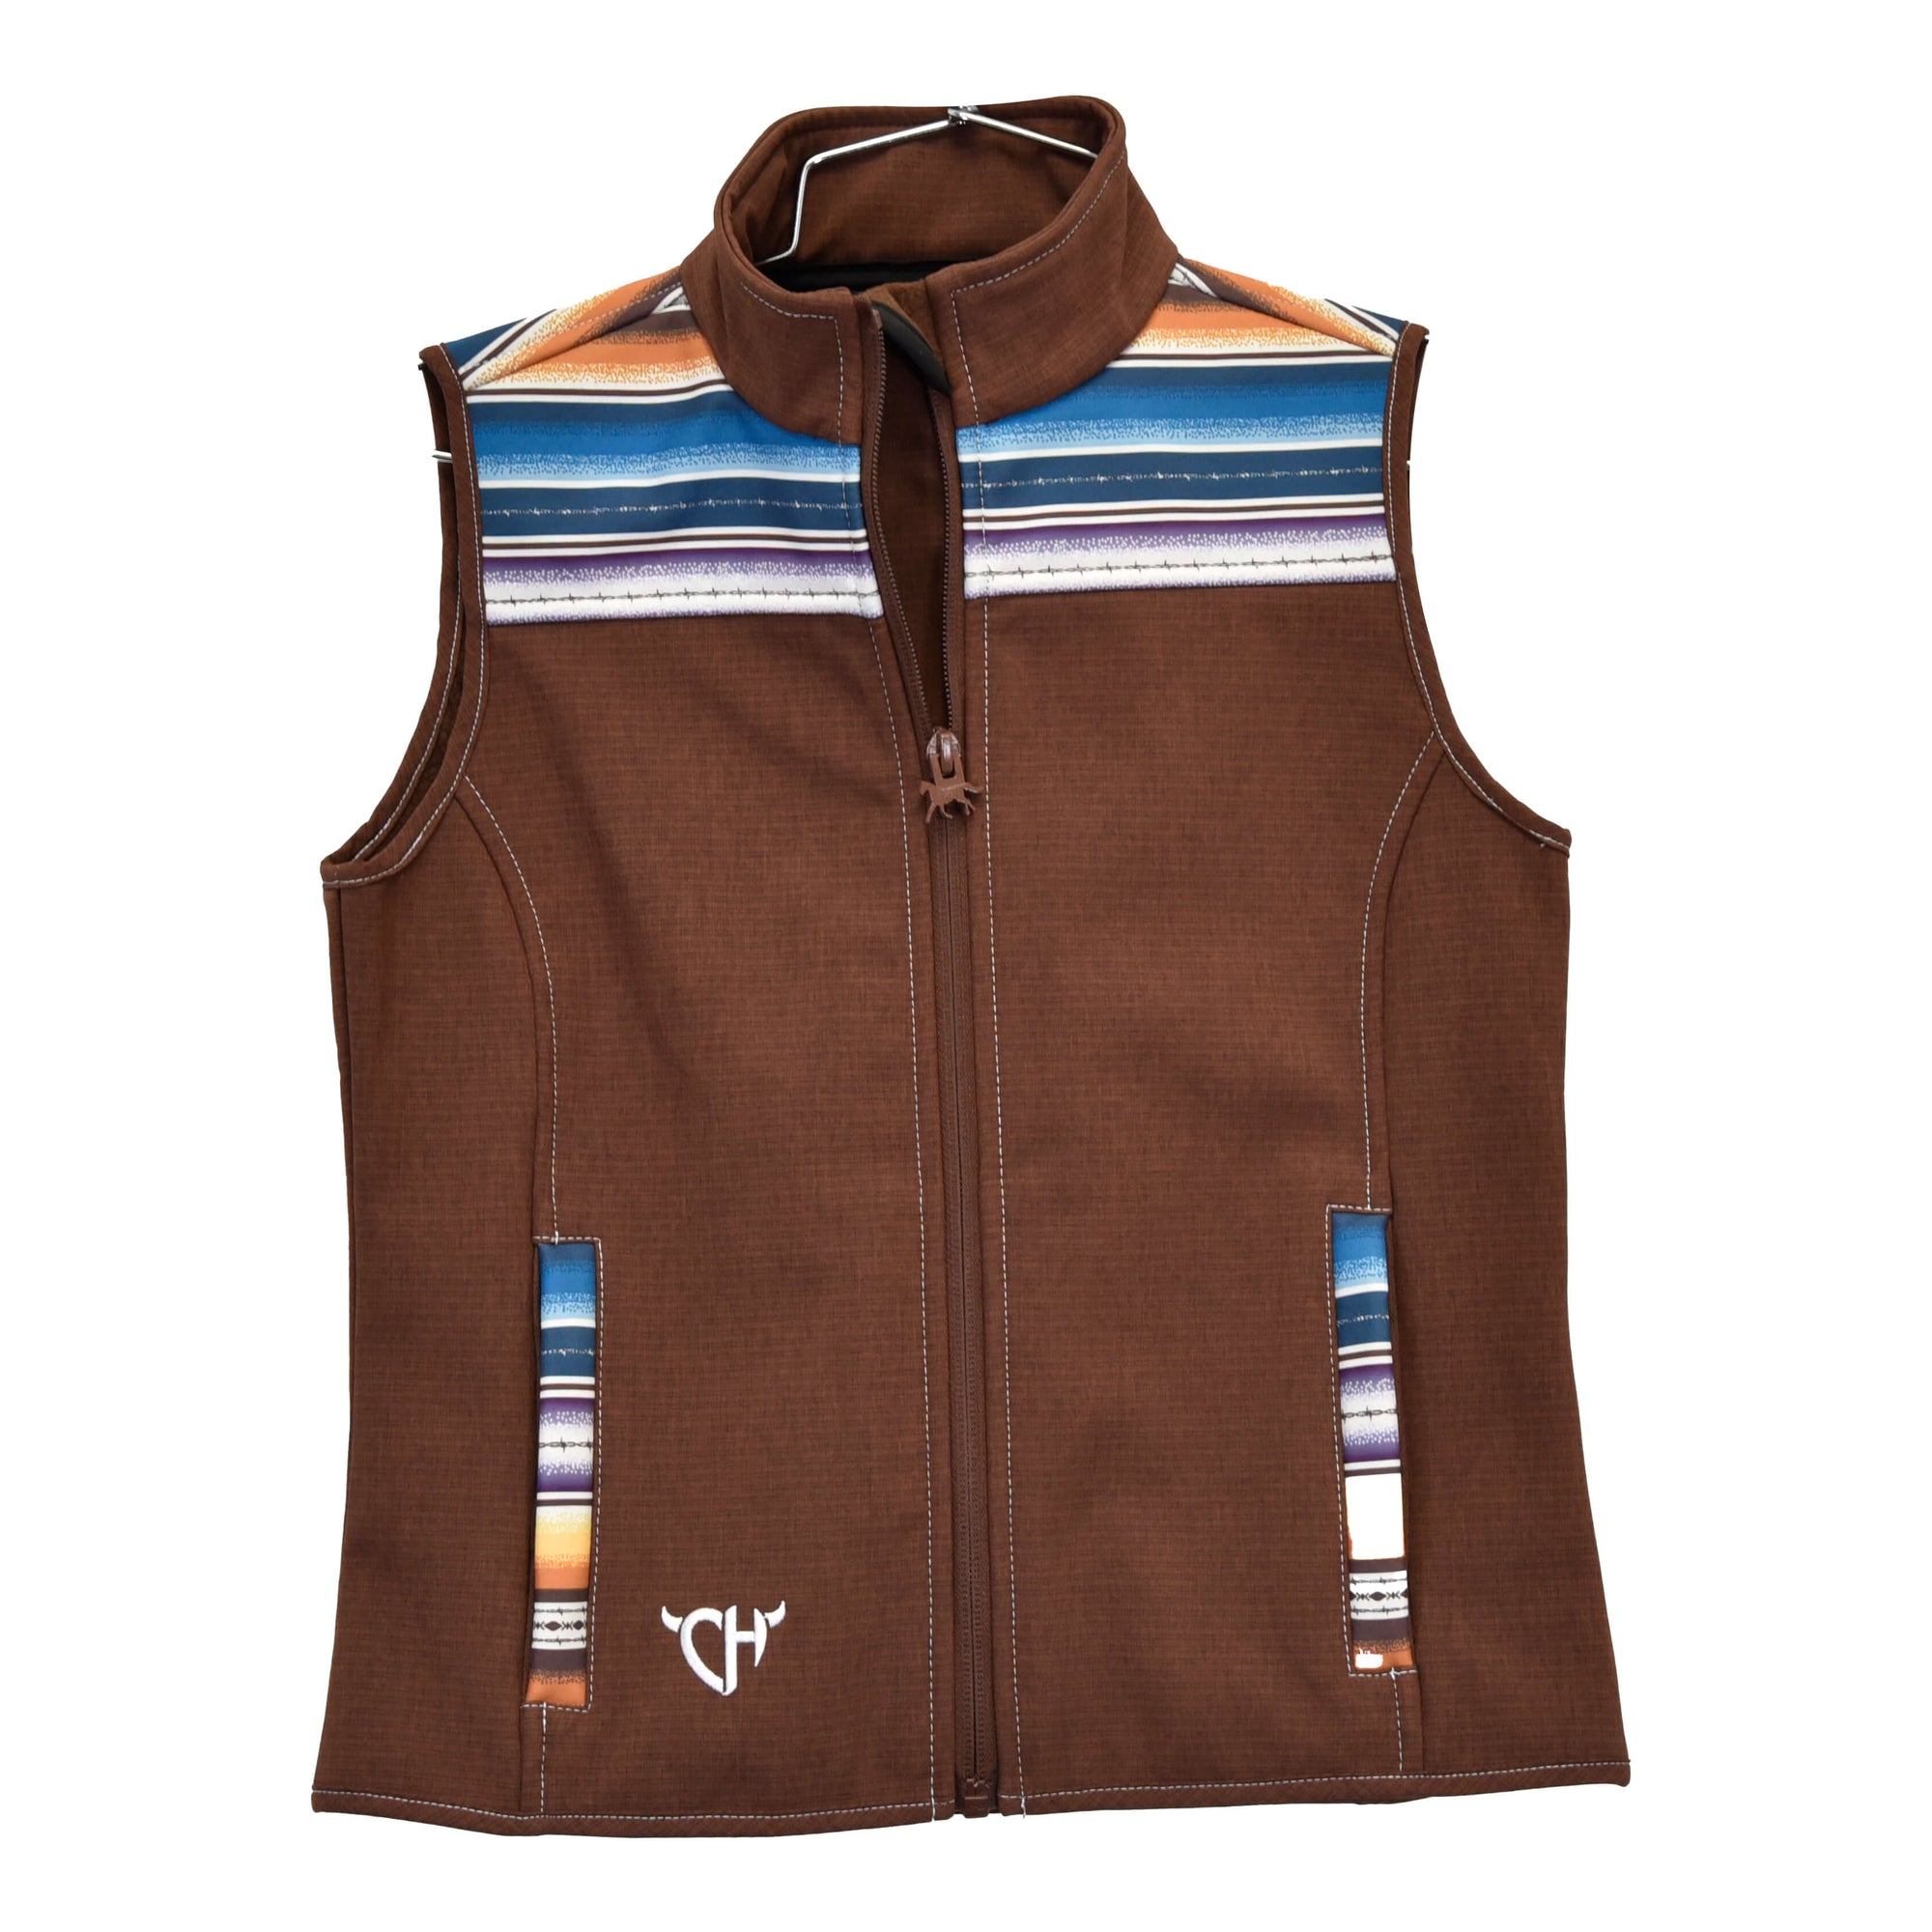 Youth Girl's Cowgirl Hardware Chevron Serape Brown Poly Shell Vest with Blue,Gold and Purple Serape Yoke from Cowboy Hardware